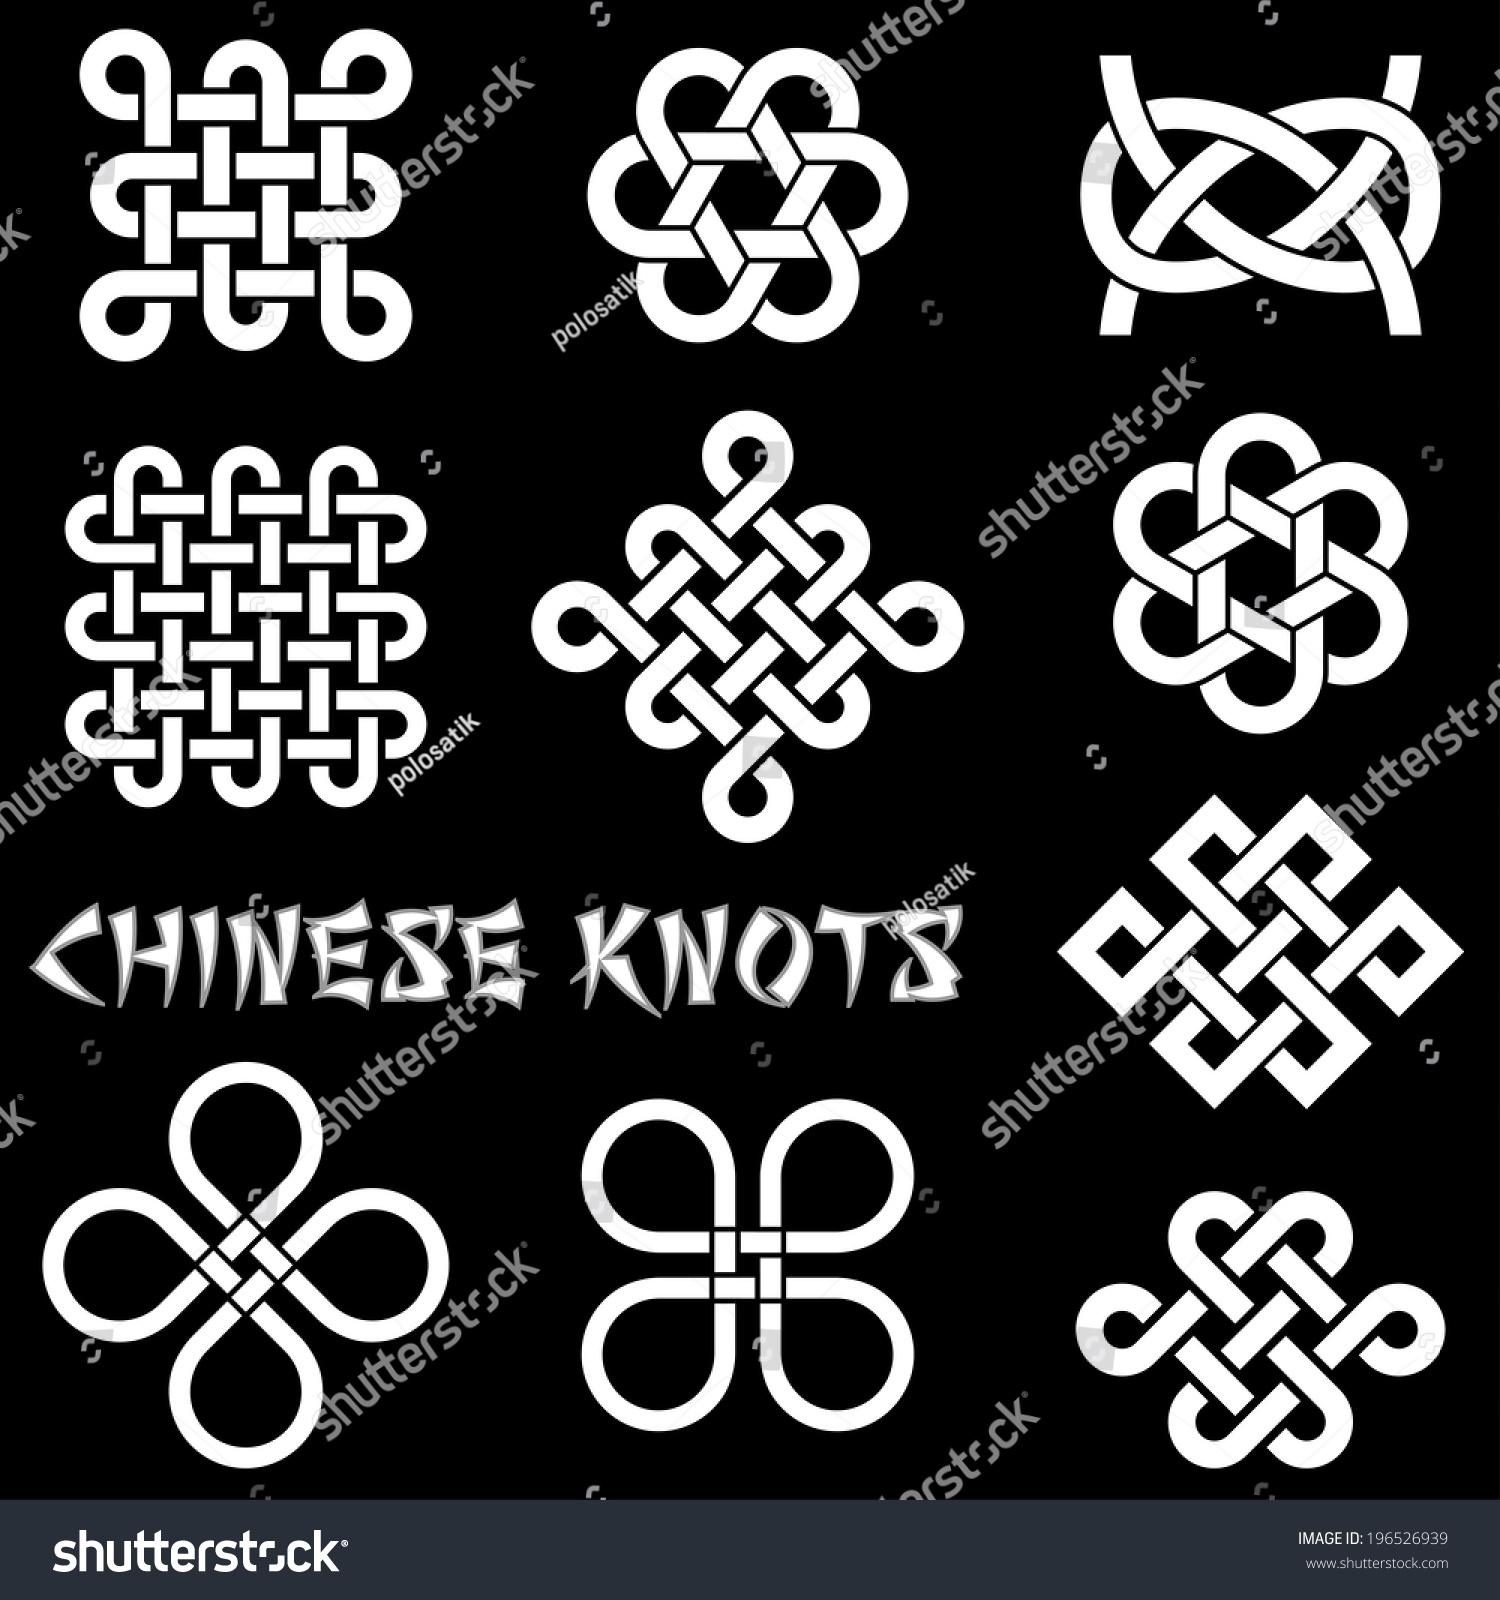 Chinese Knots Clover Leaf Flower Knot Stock Vector 196526939 - Shutterstock